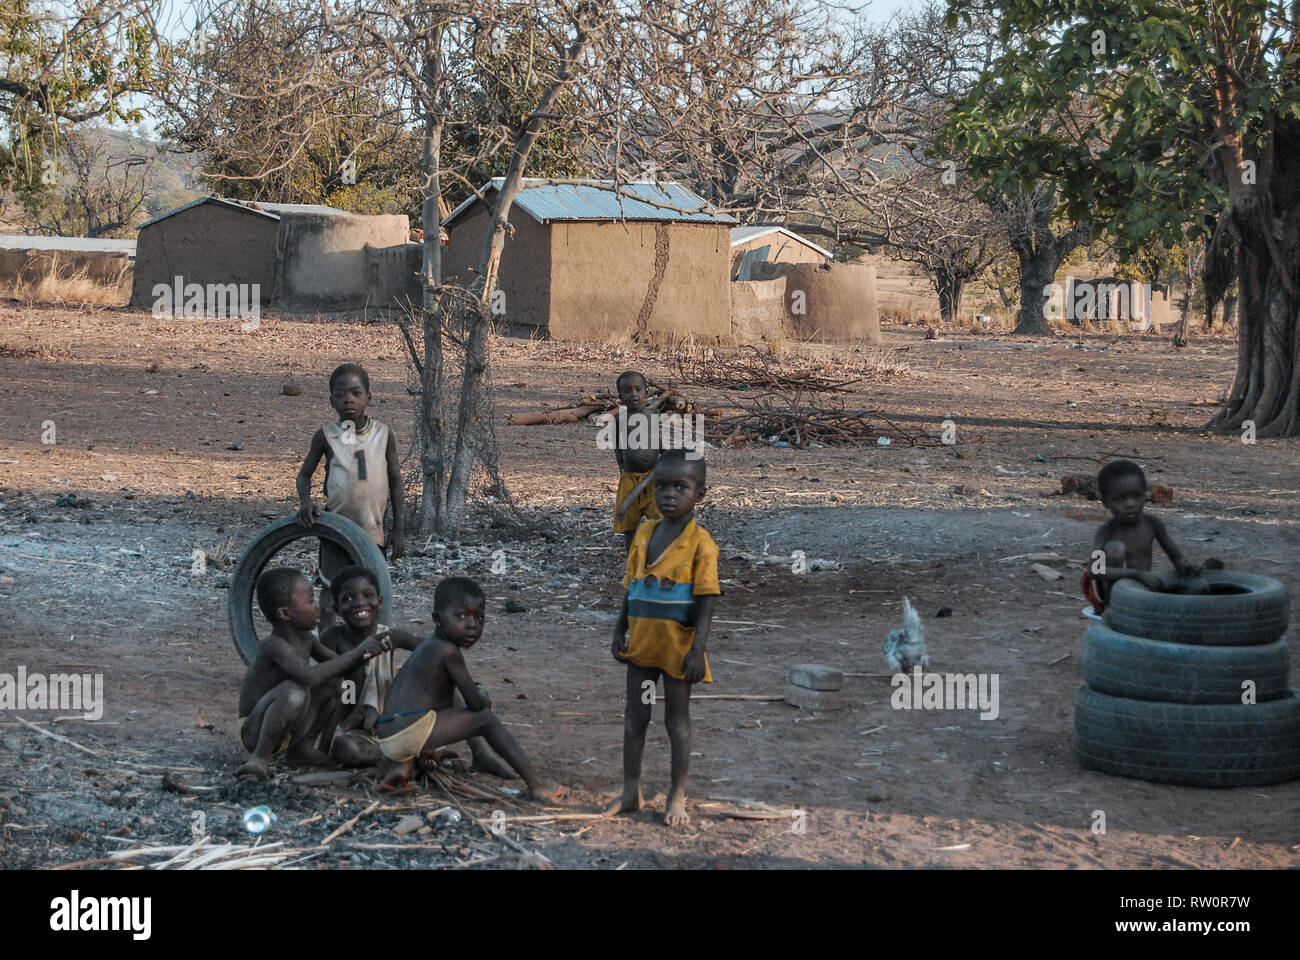 A photo of Ghanaian children posing for the camera as they are playing with old car tyres in the yard. Taken in a savanna of Ghana. Stock Photo